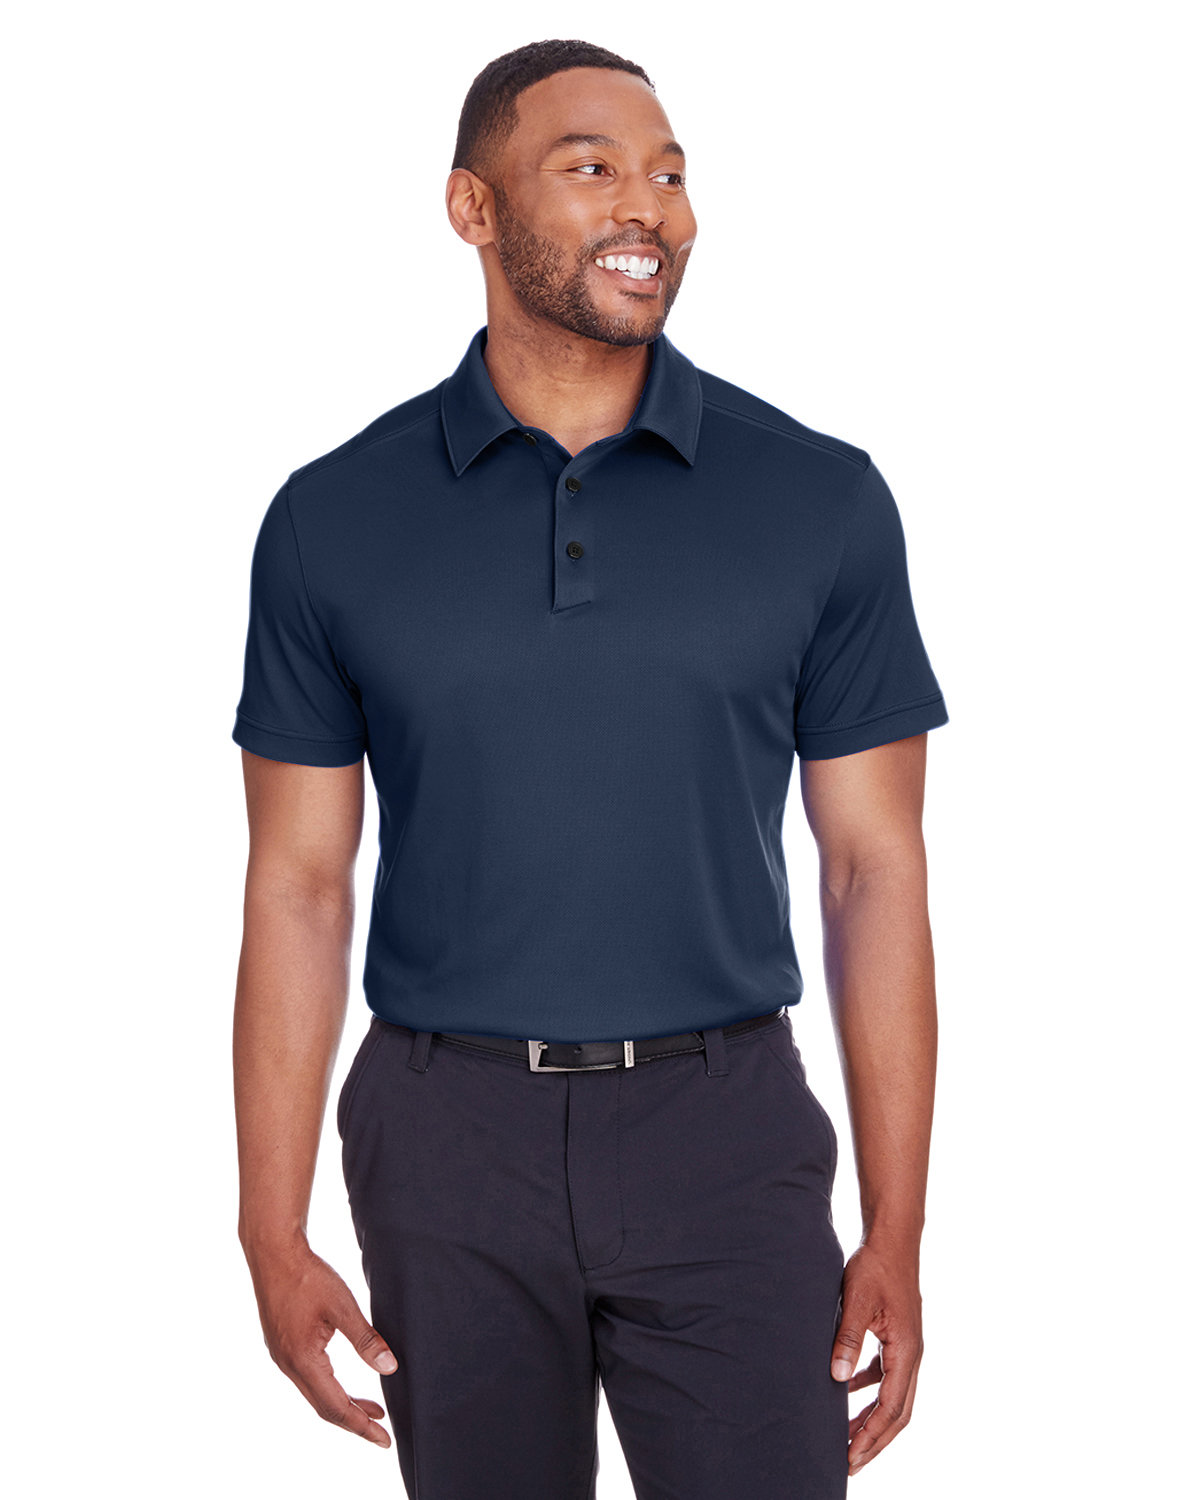 Spyder Men's Freestyle Polo FRONTIER 